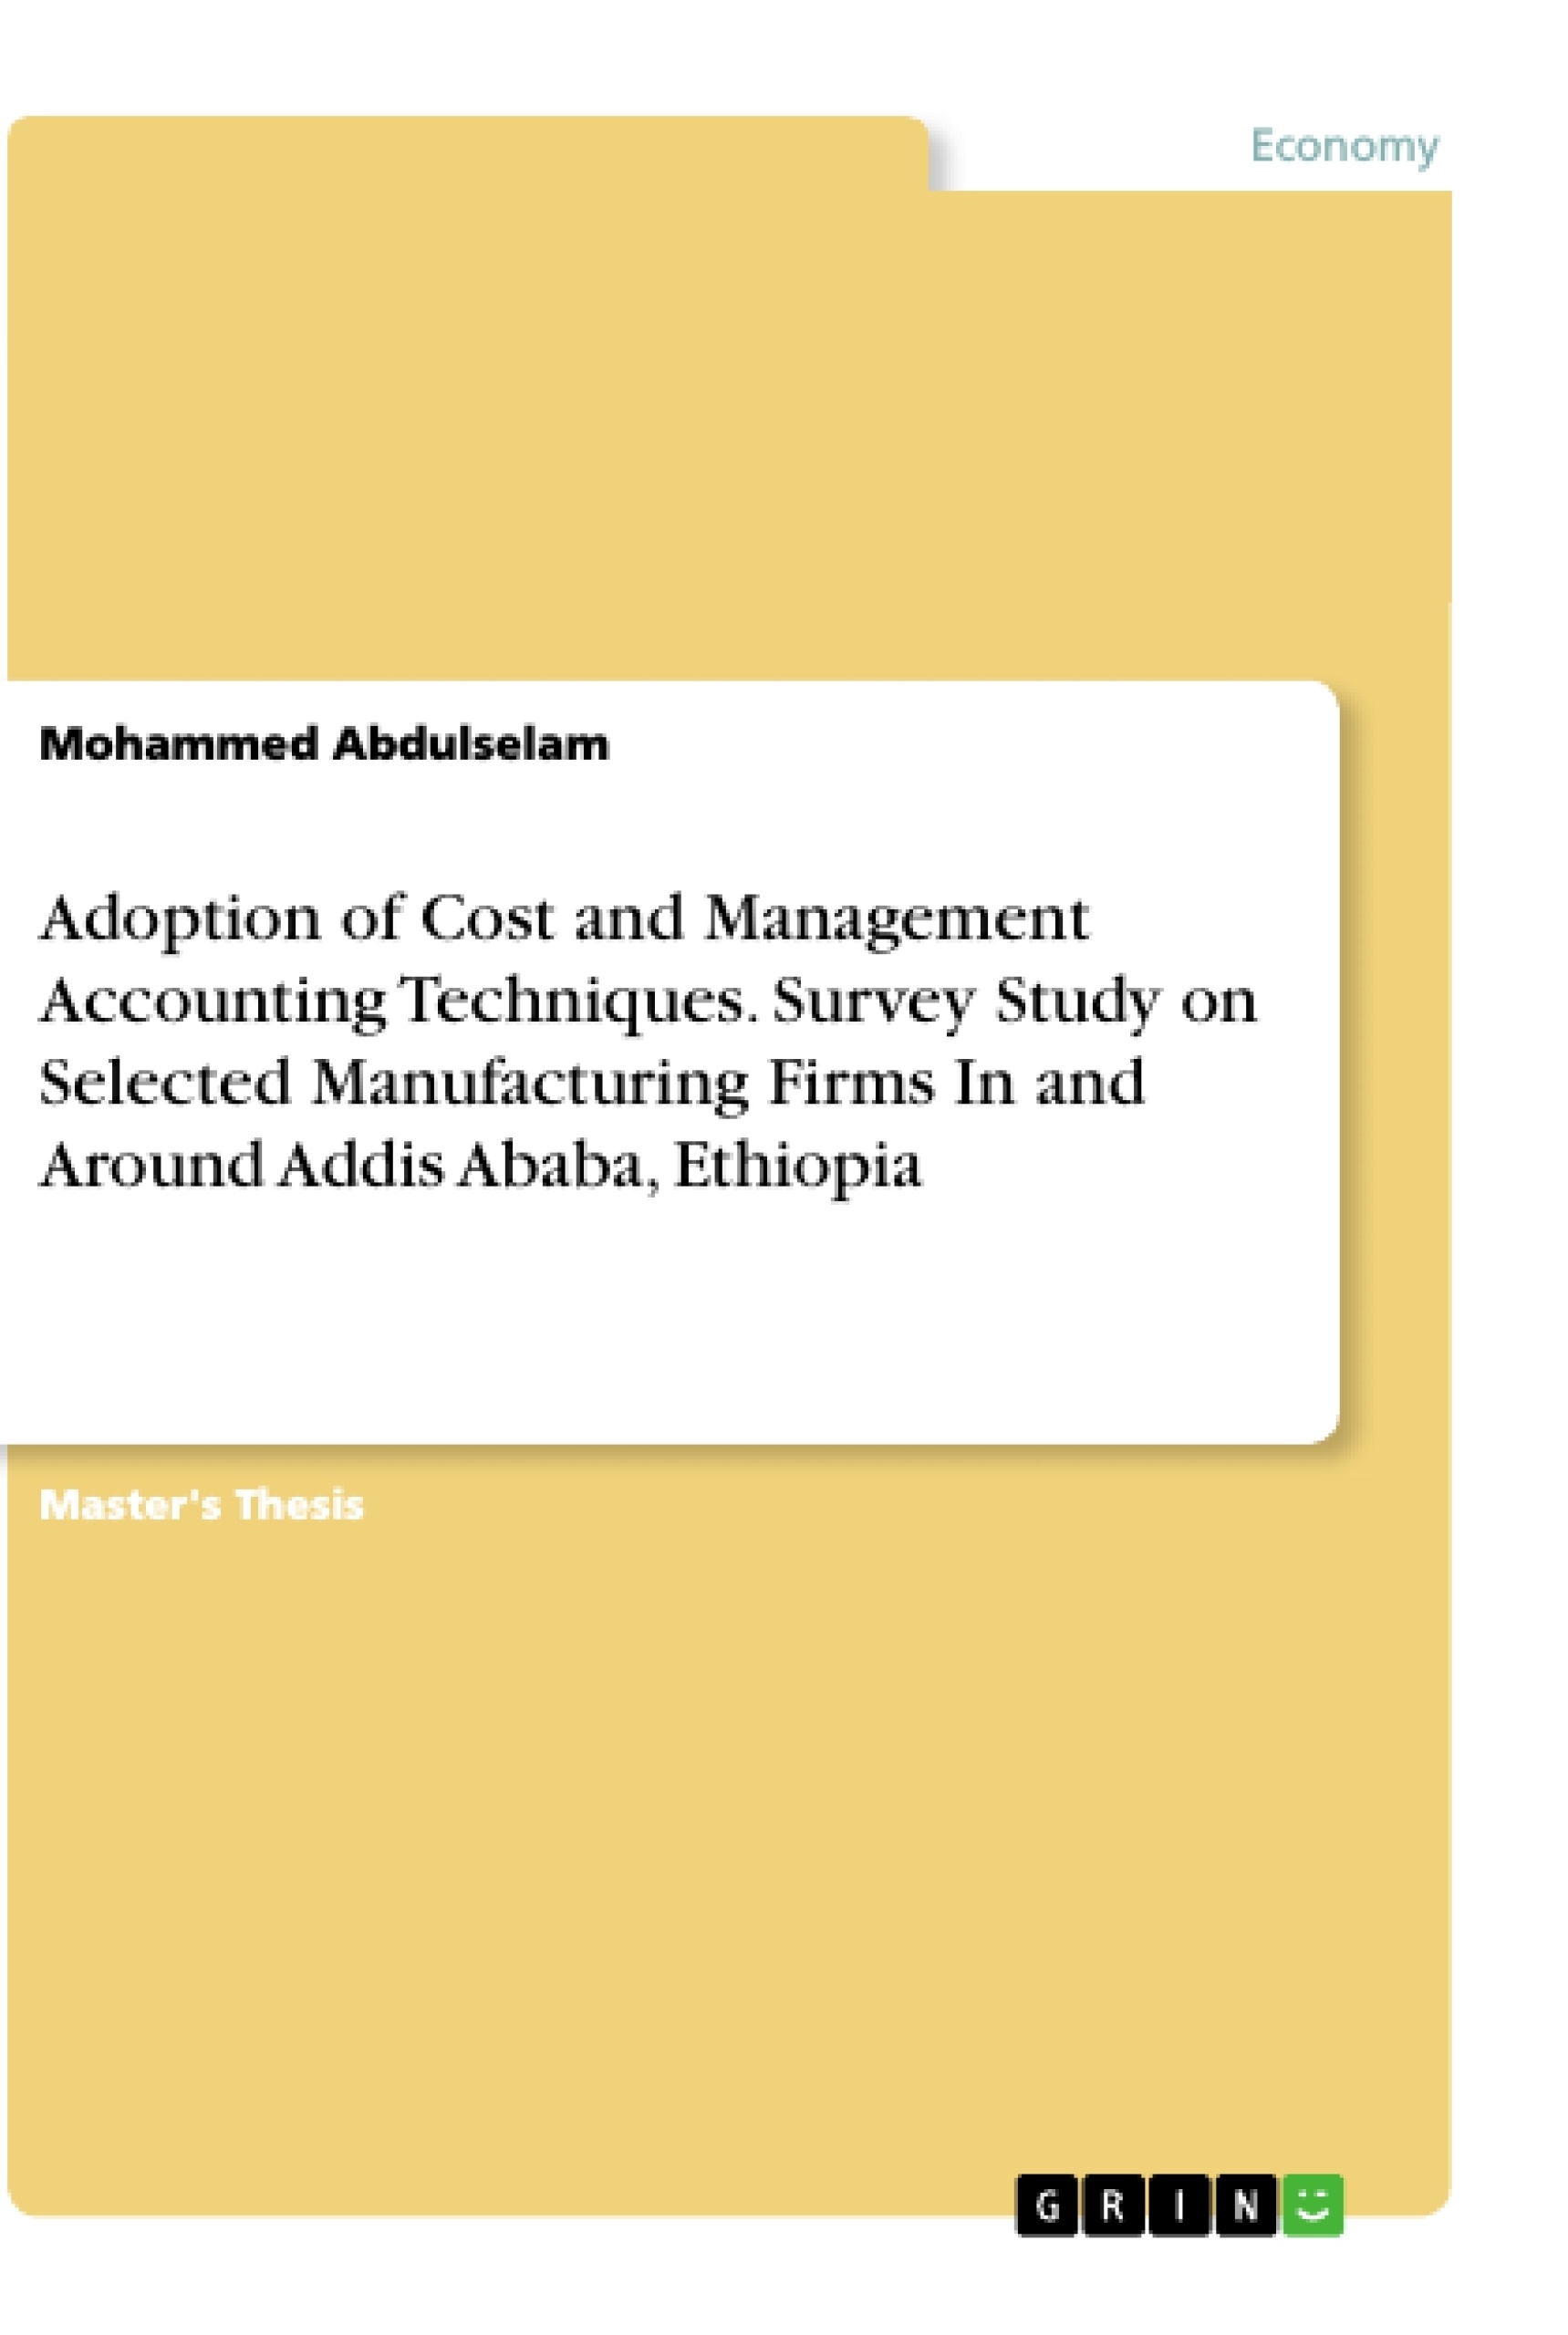 Title: Adoption of Cost and Management Accounting Techniques. Survey Study on Selected Manufacturing Firms In and Around Addis Ababa, Ethiopia